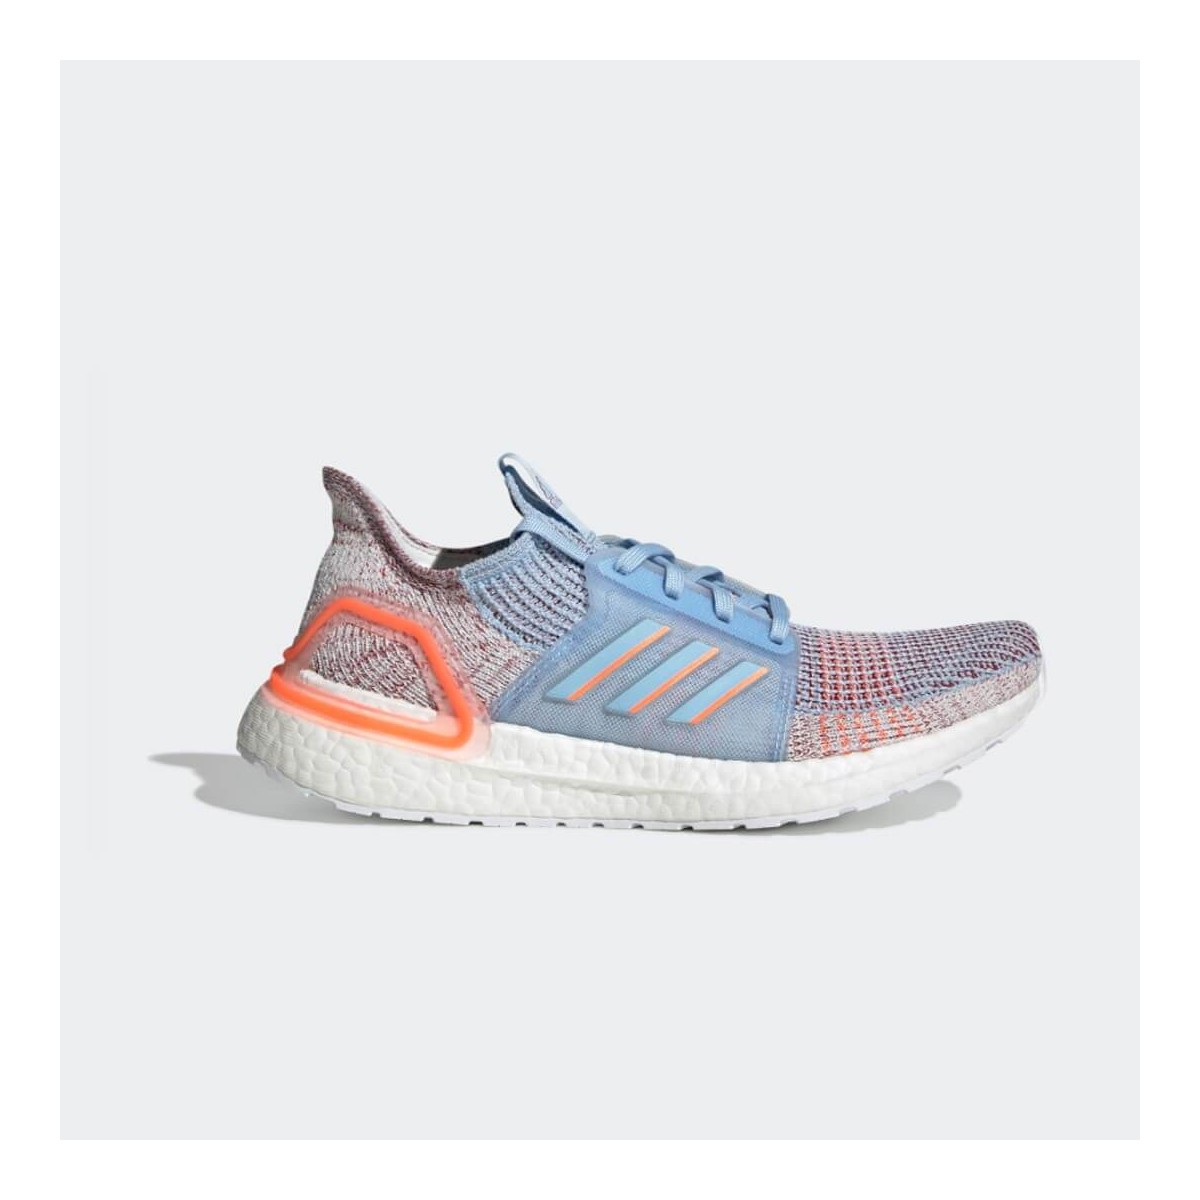 mineral Énfasis Persona enferma Adidas Ultra Boost 19 Coral Blue AW19 Women's Shoes